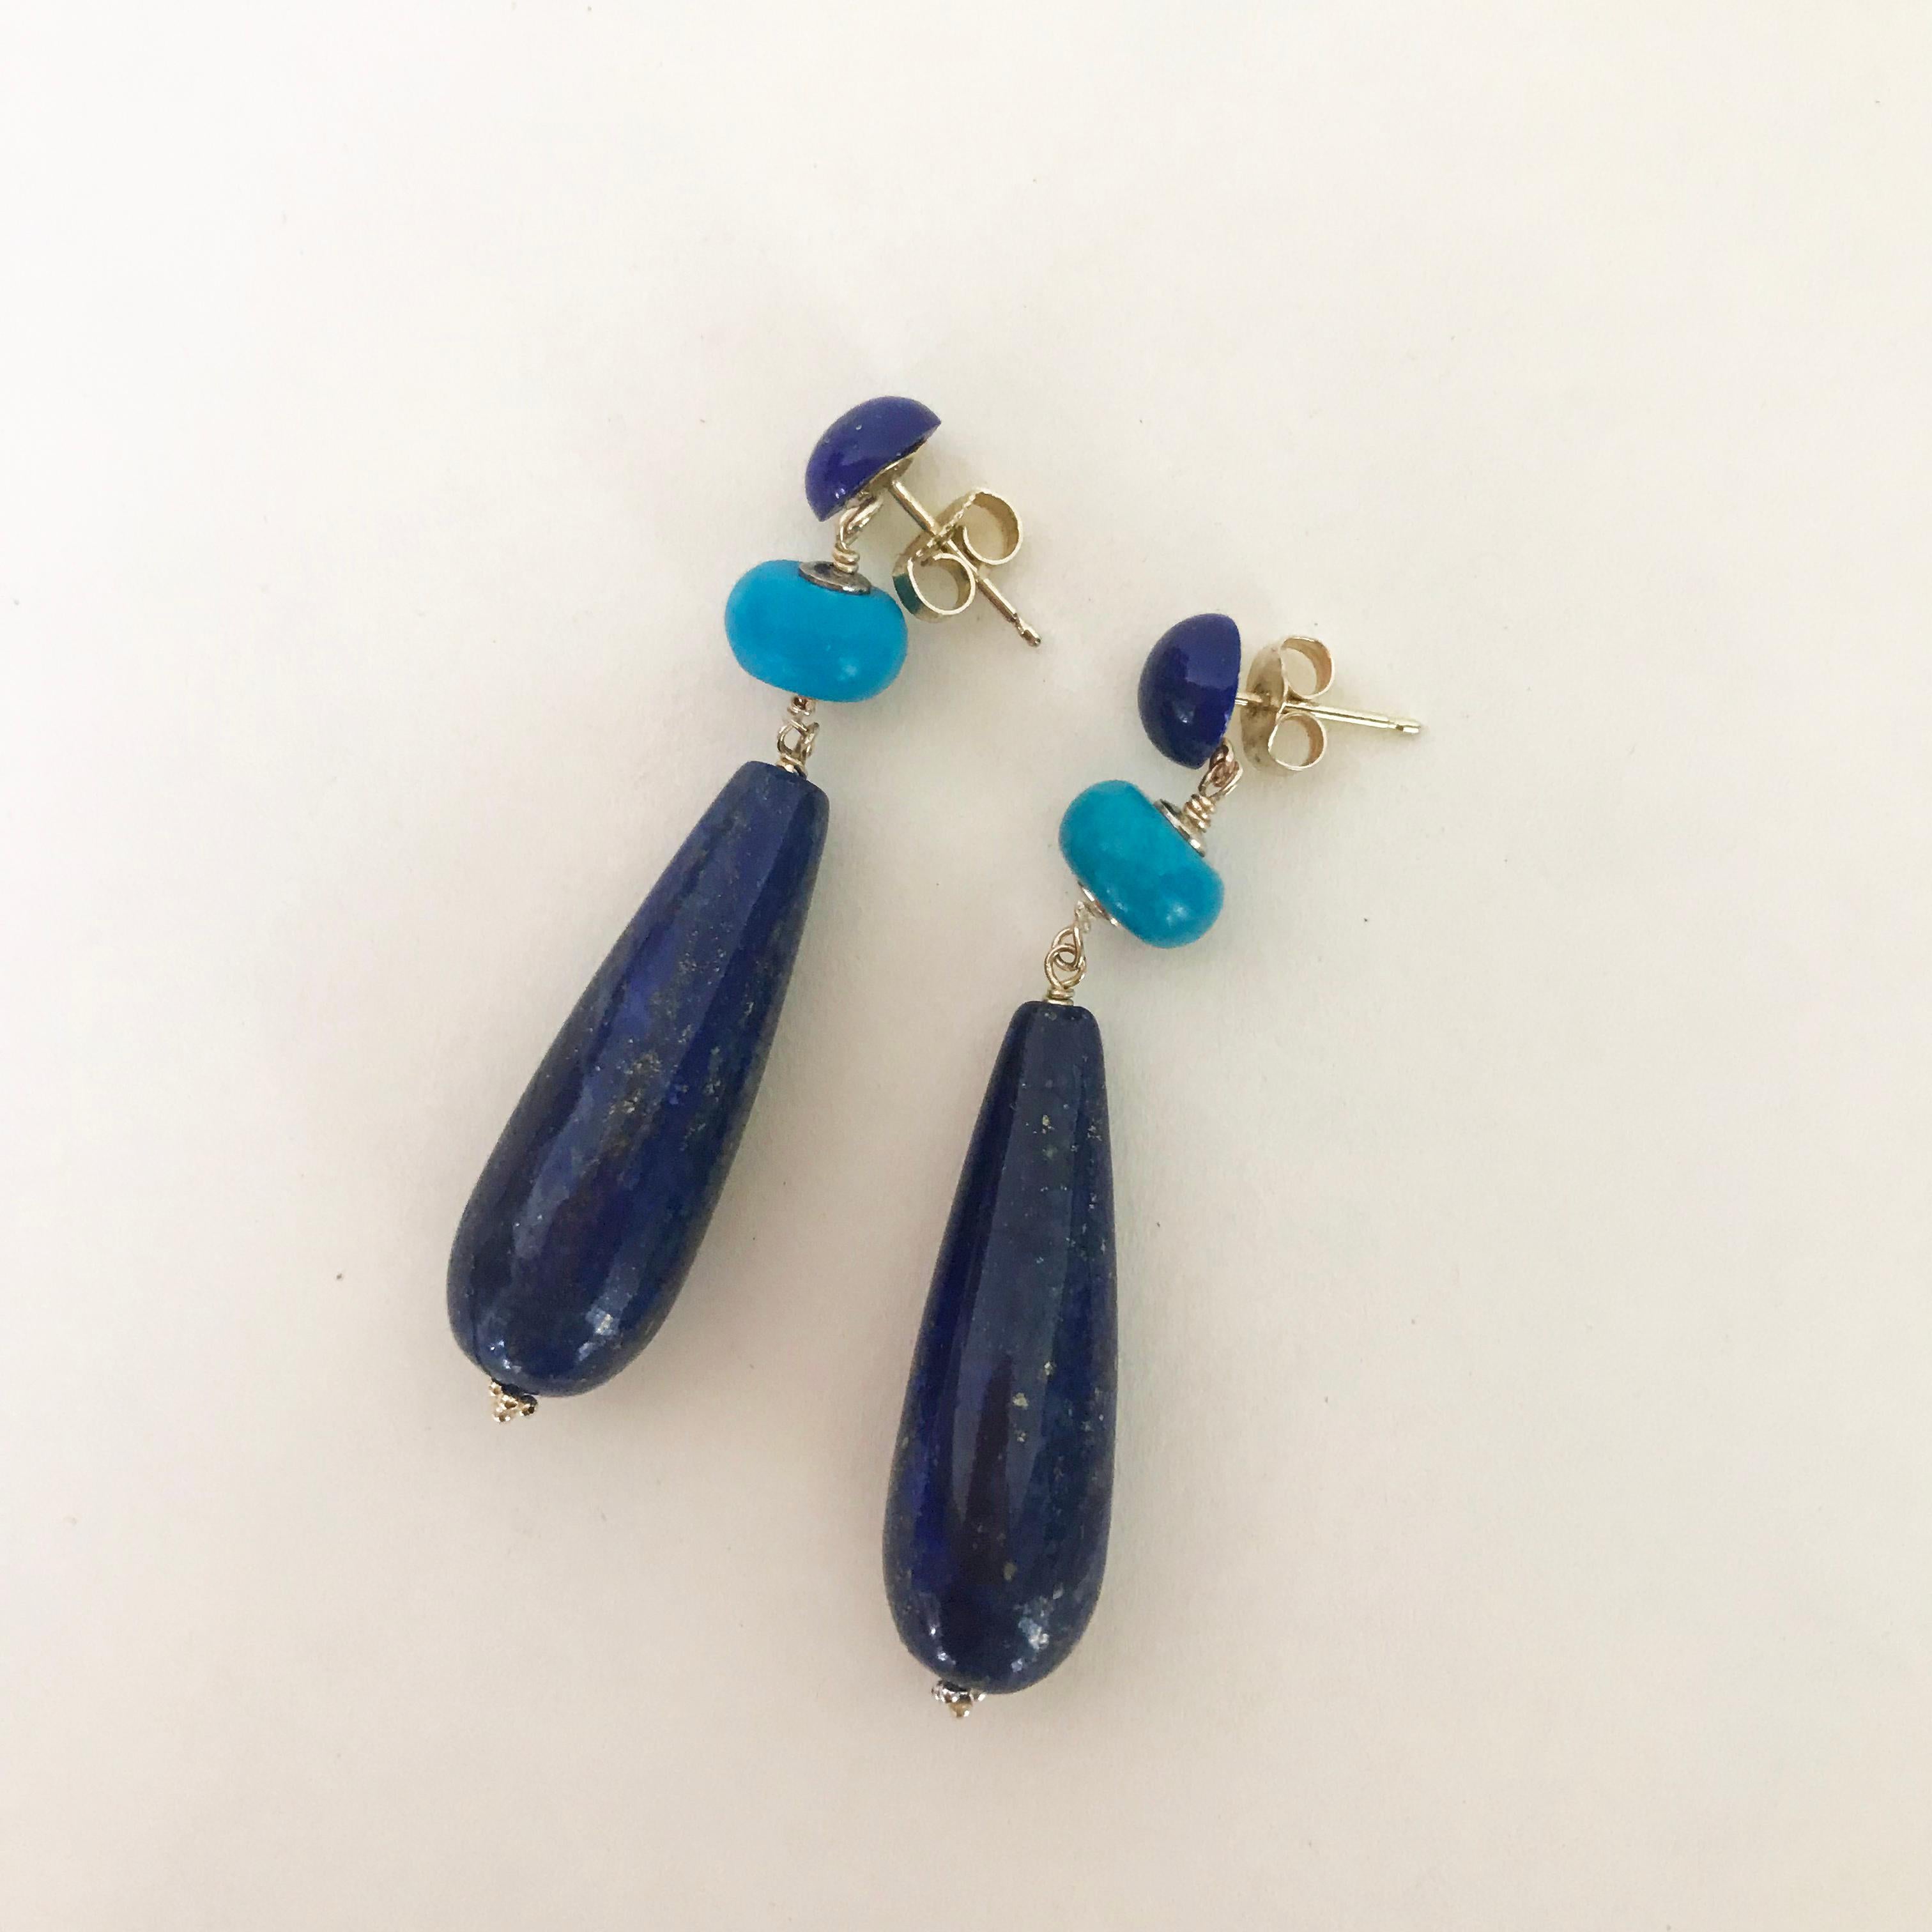 Women's Marina J Lapis Lazuli and Turquoise Earrings with 14 Karat Gold Studs and Wiring